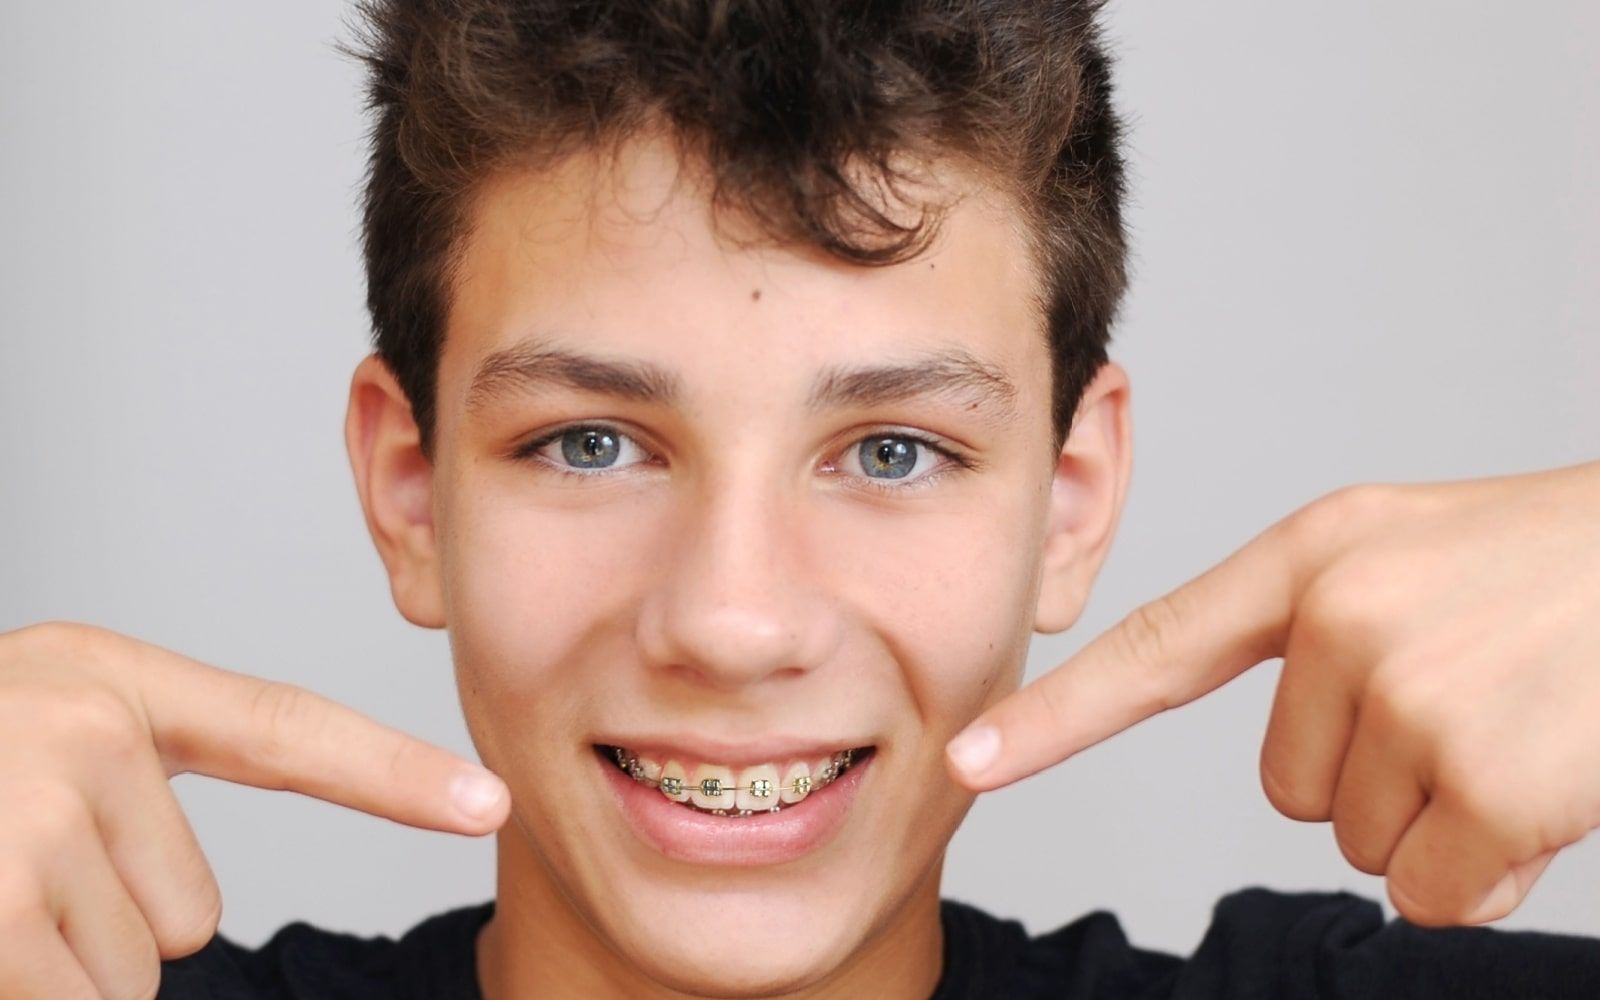 Teenager pointing at braces